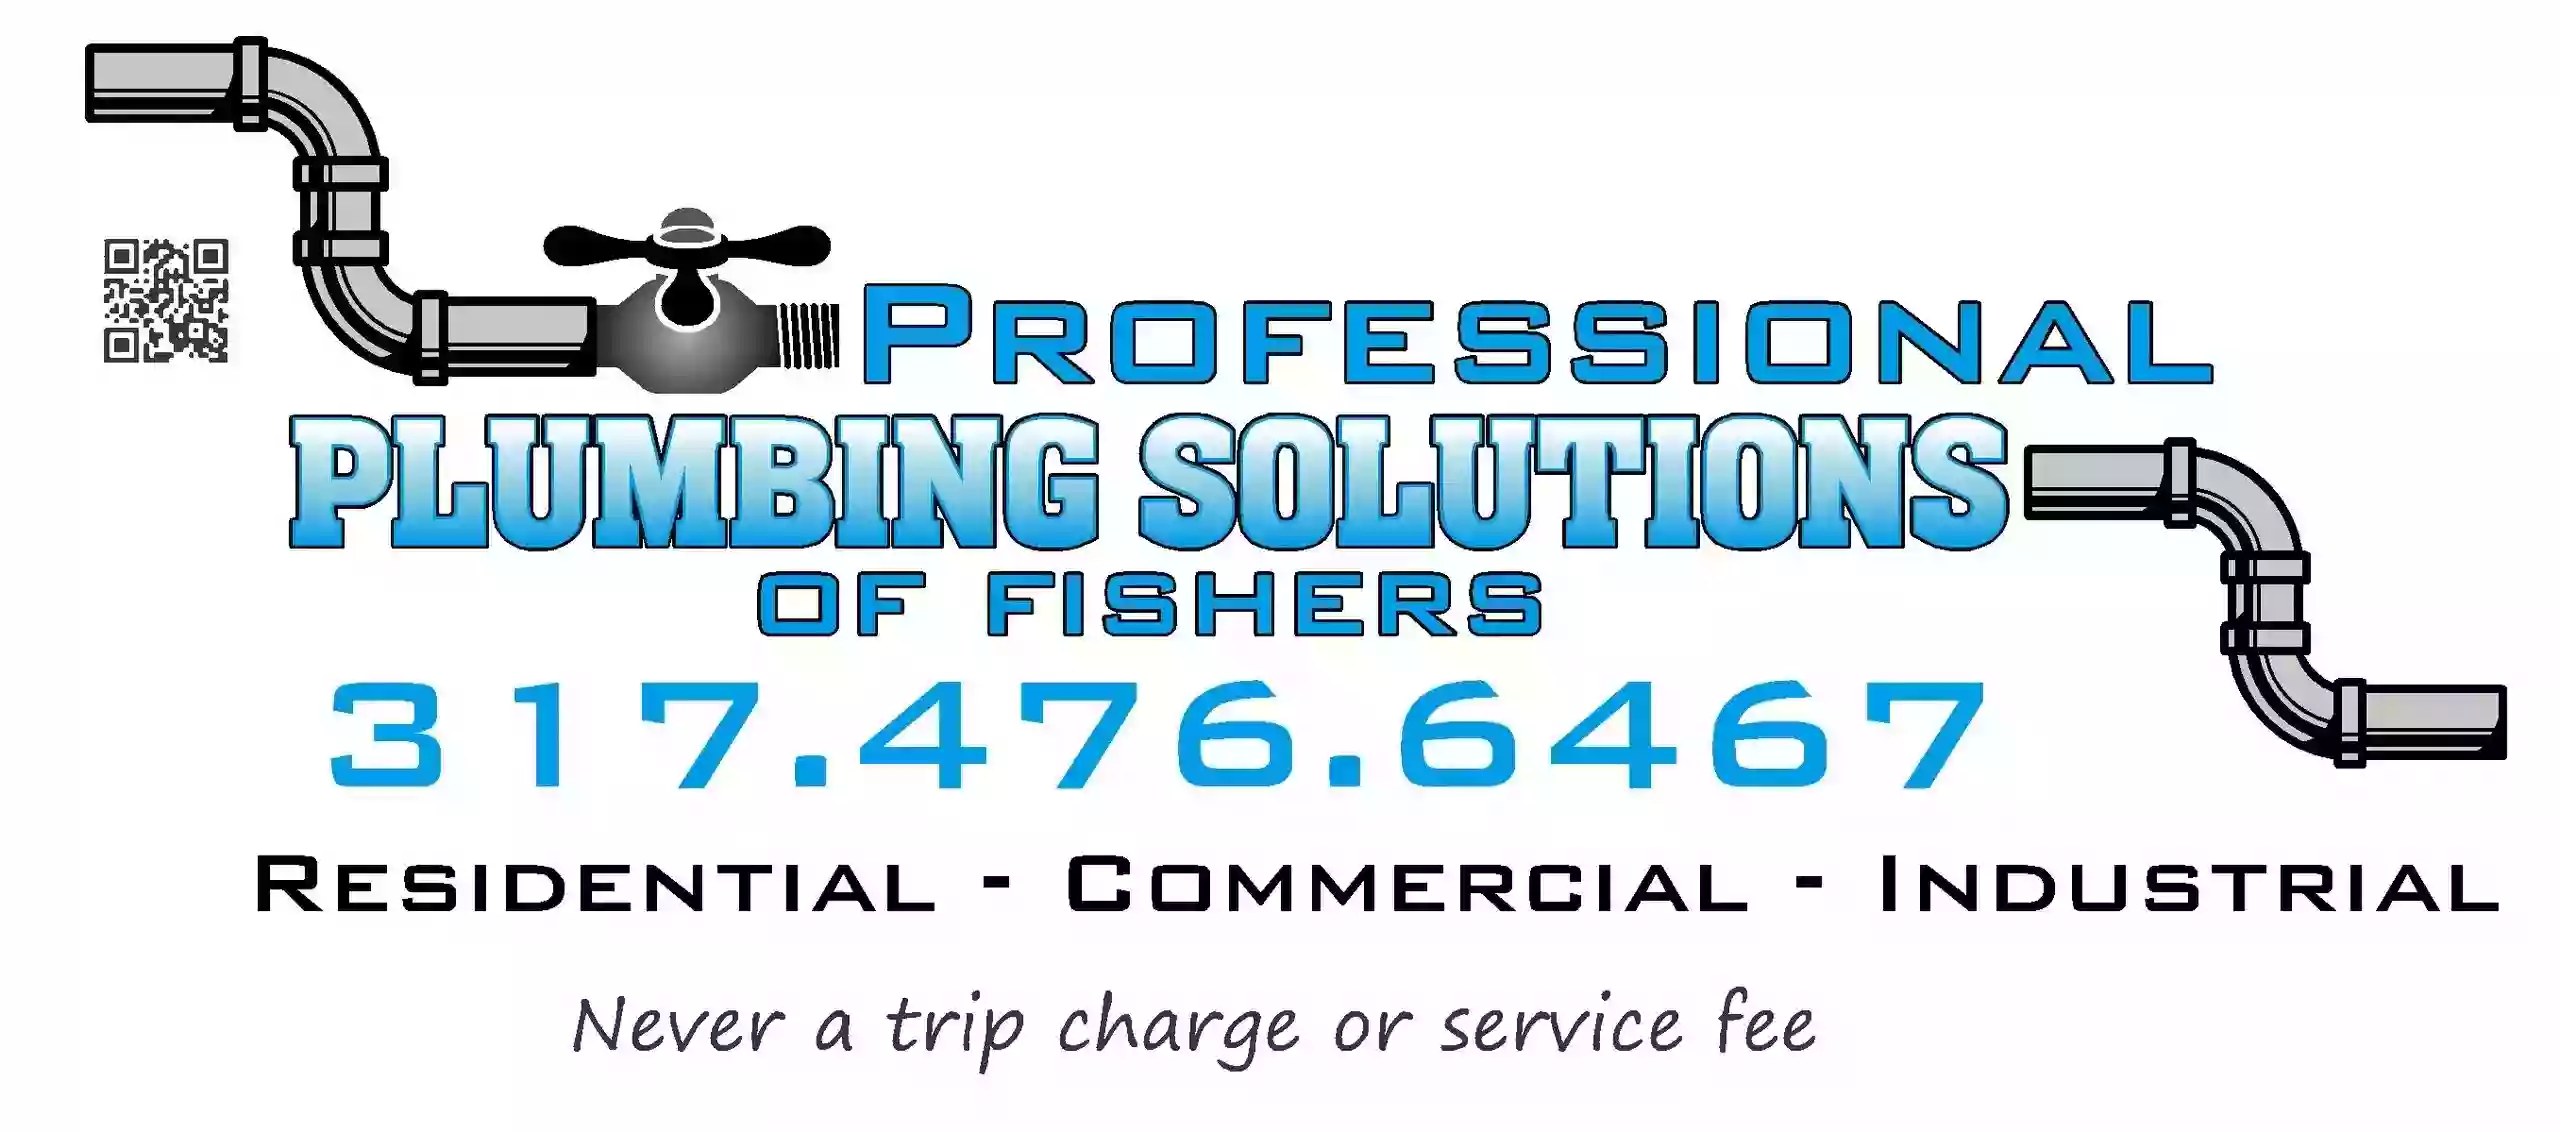 Professional Plumbing Solutions of Fishers